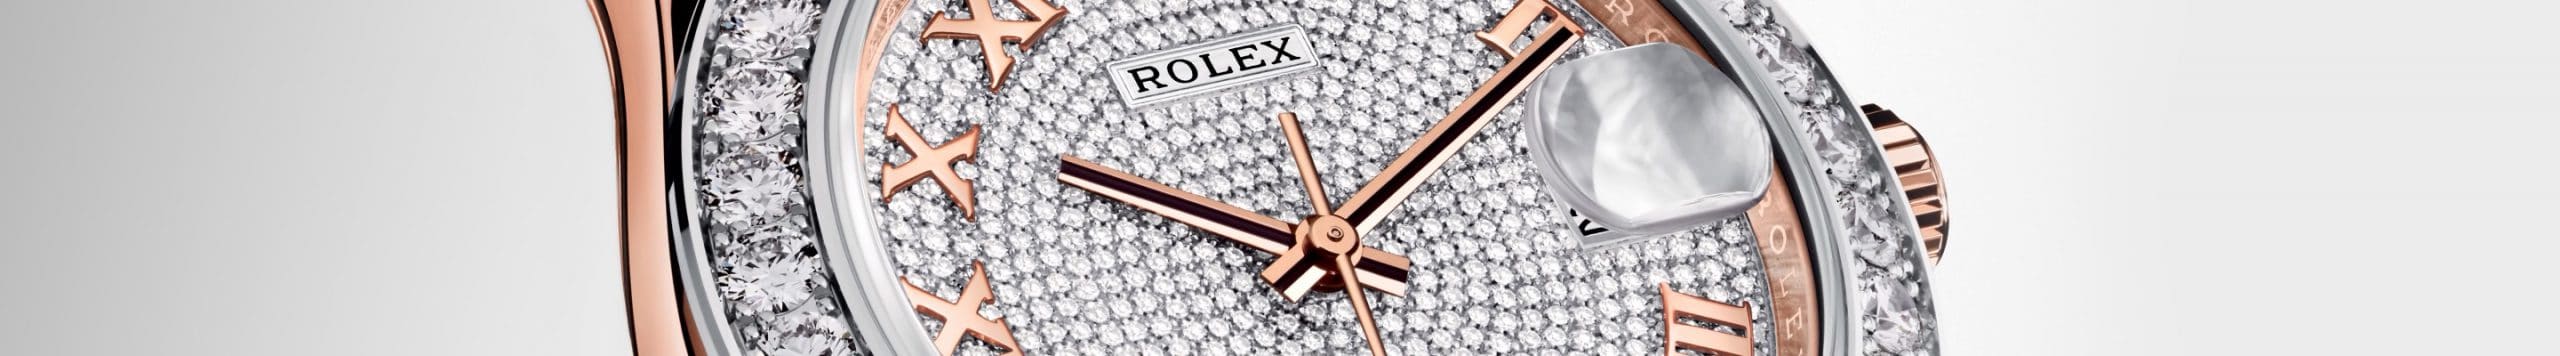 Rolex Pearlmaster | Rolex Official Retailer - The Time Place Singapore